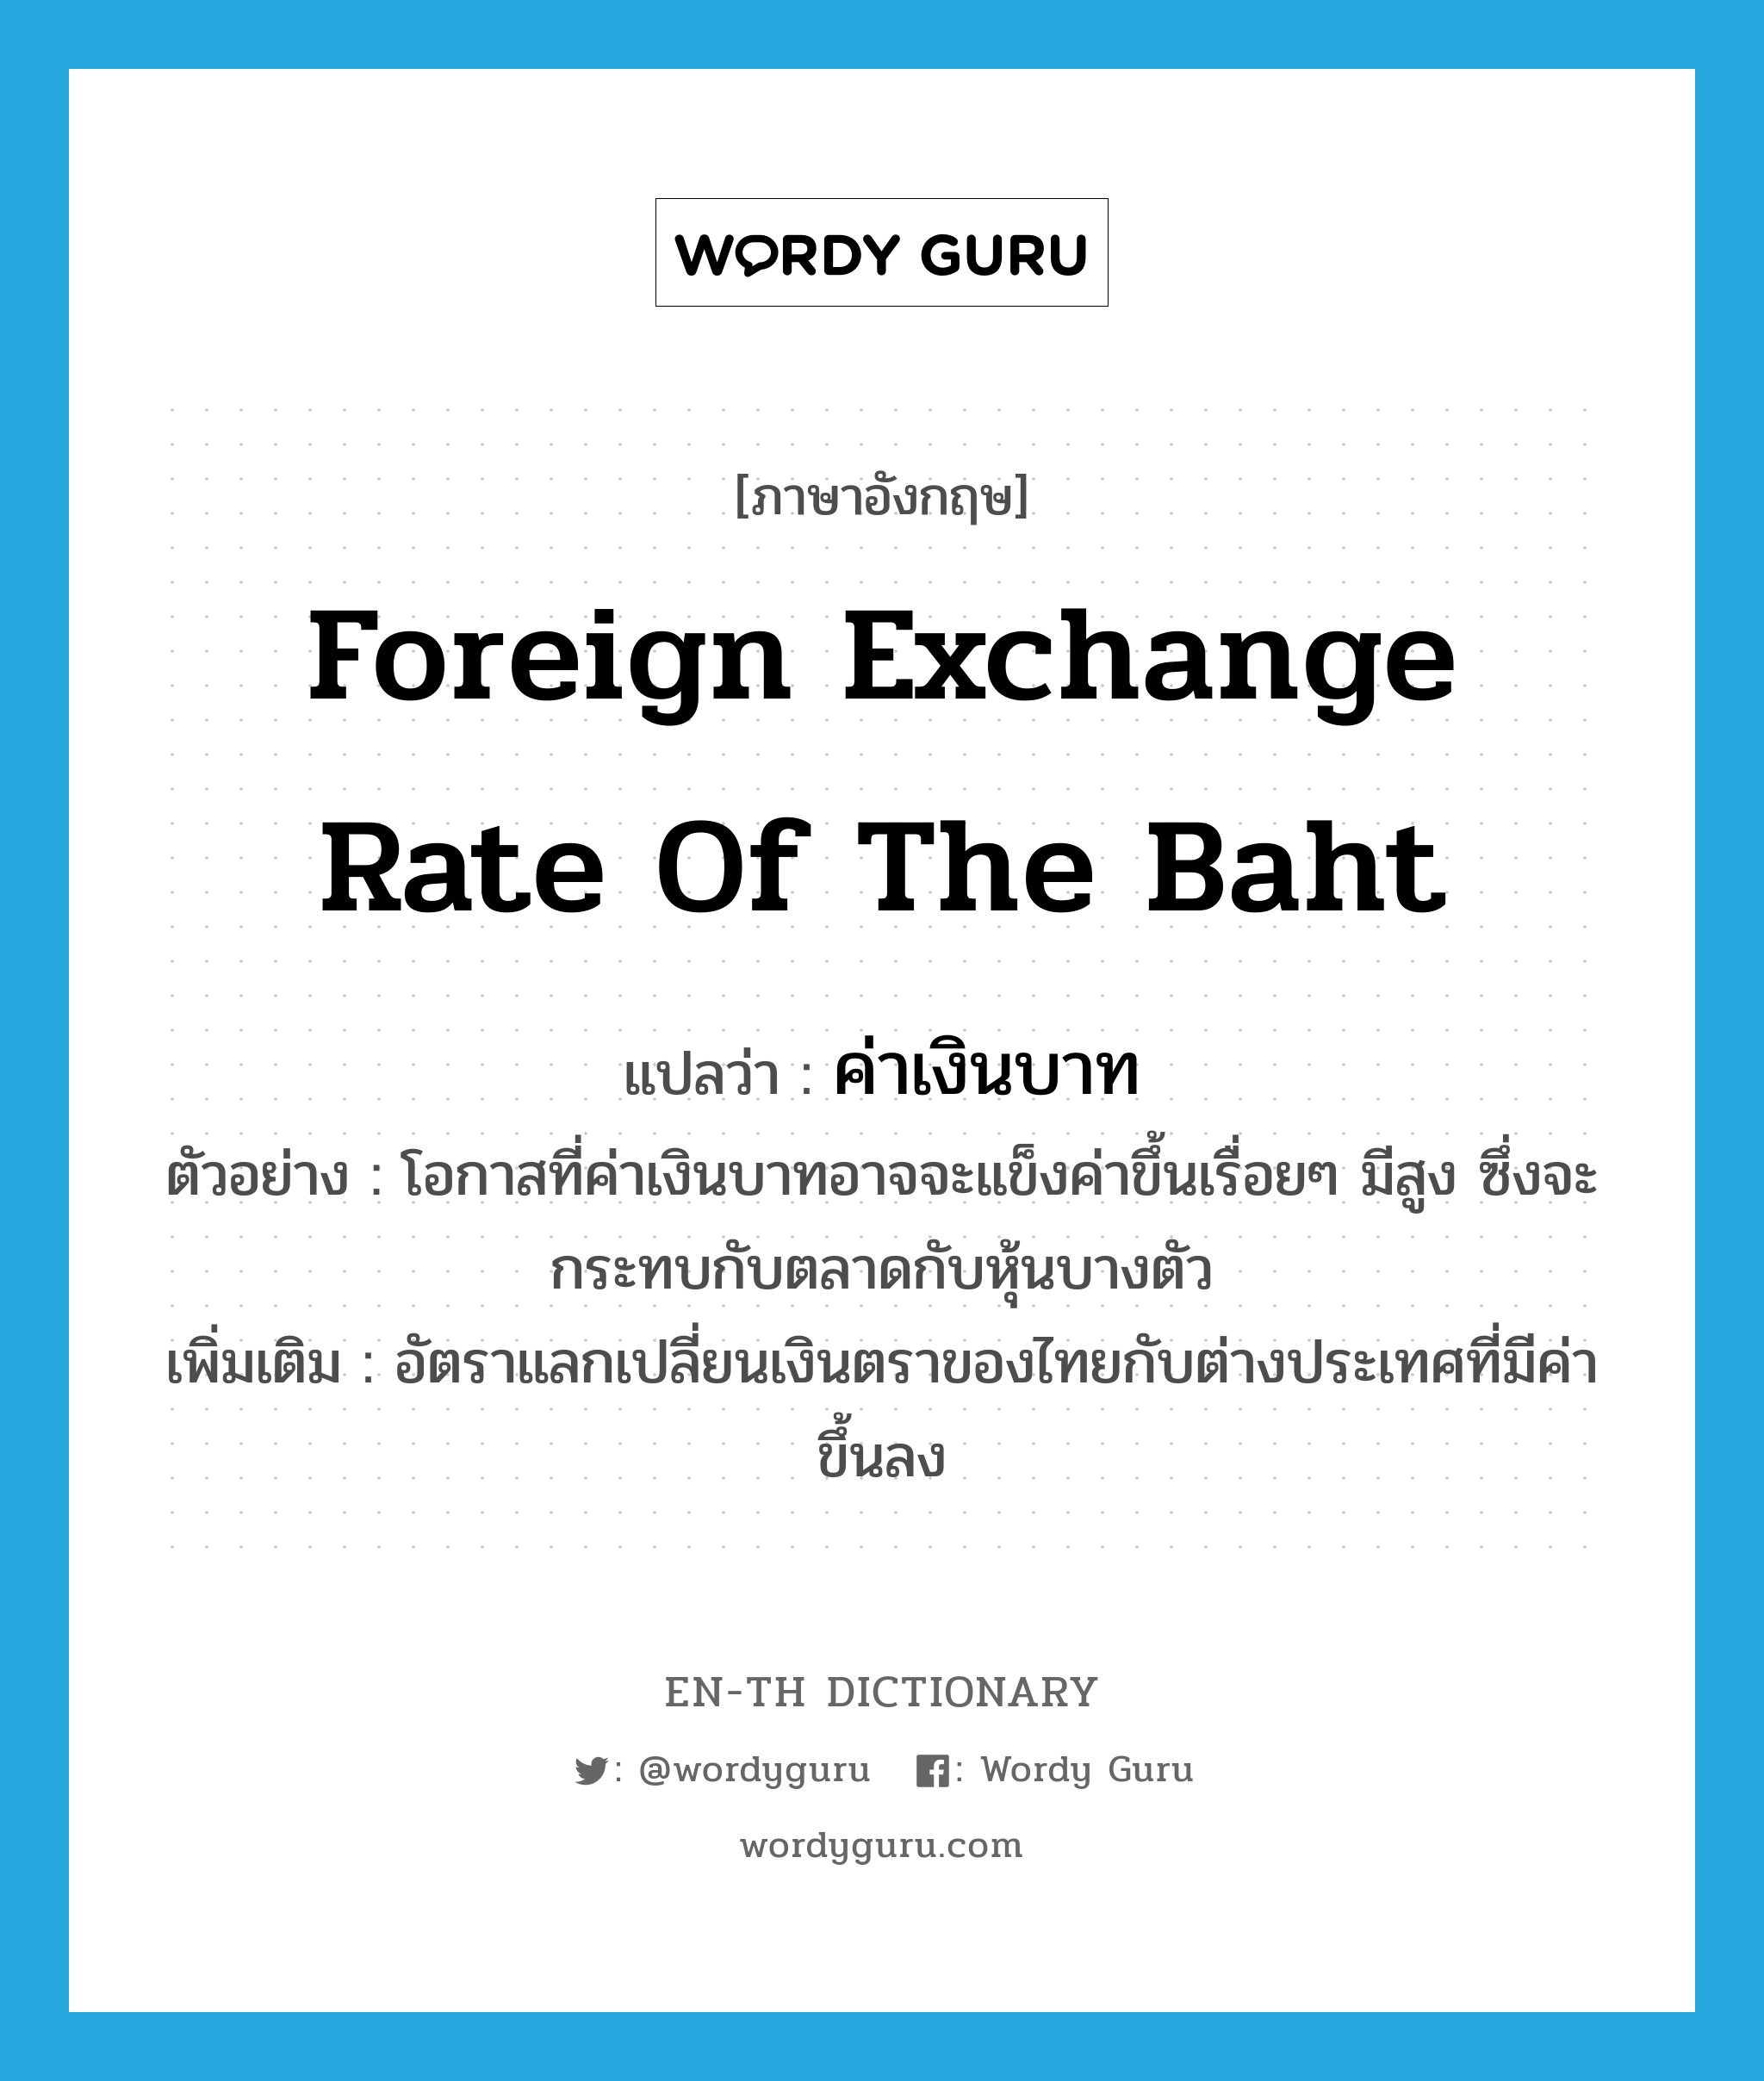 Foreign Exchange Rate Of The Baht แปลว่า? | Wordy Guru